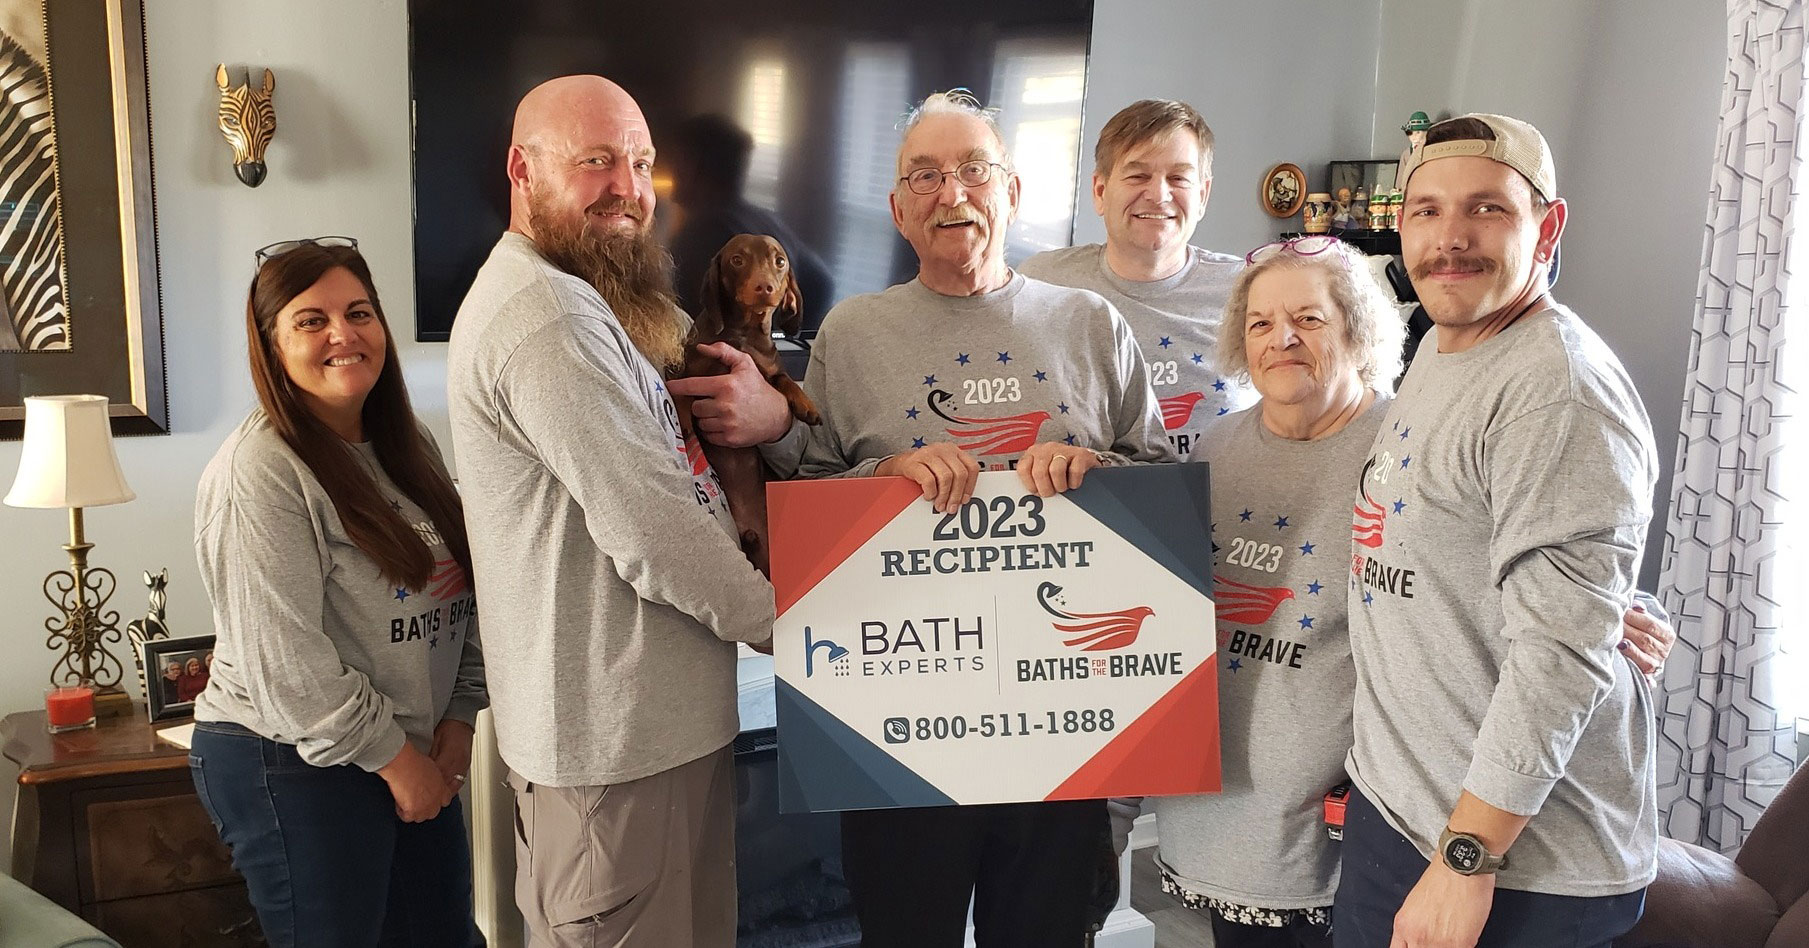 Bath Experts Transforms Lives with “Baths for the Brave” Program